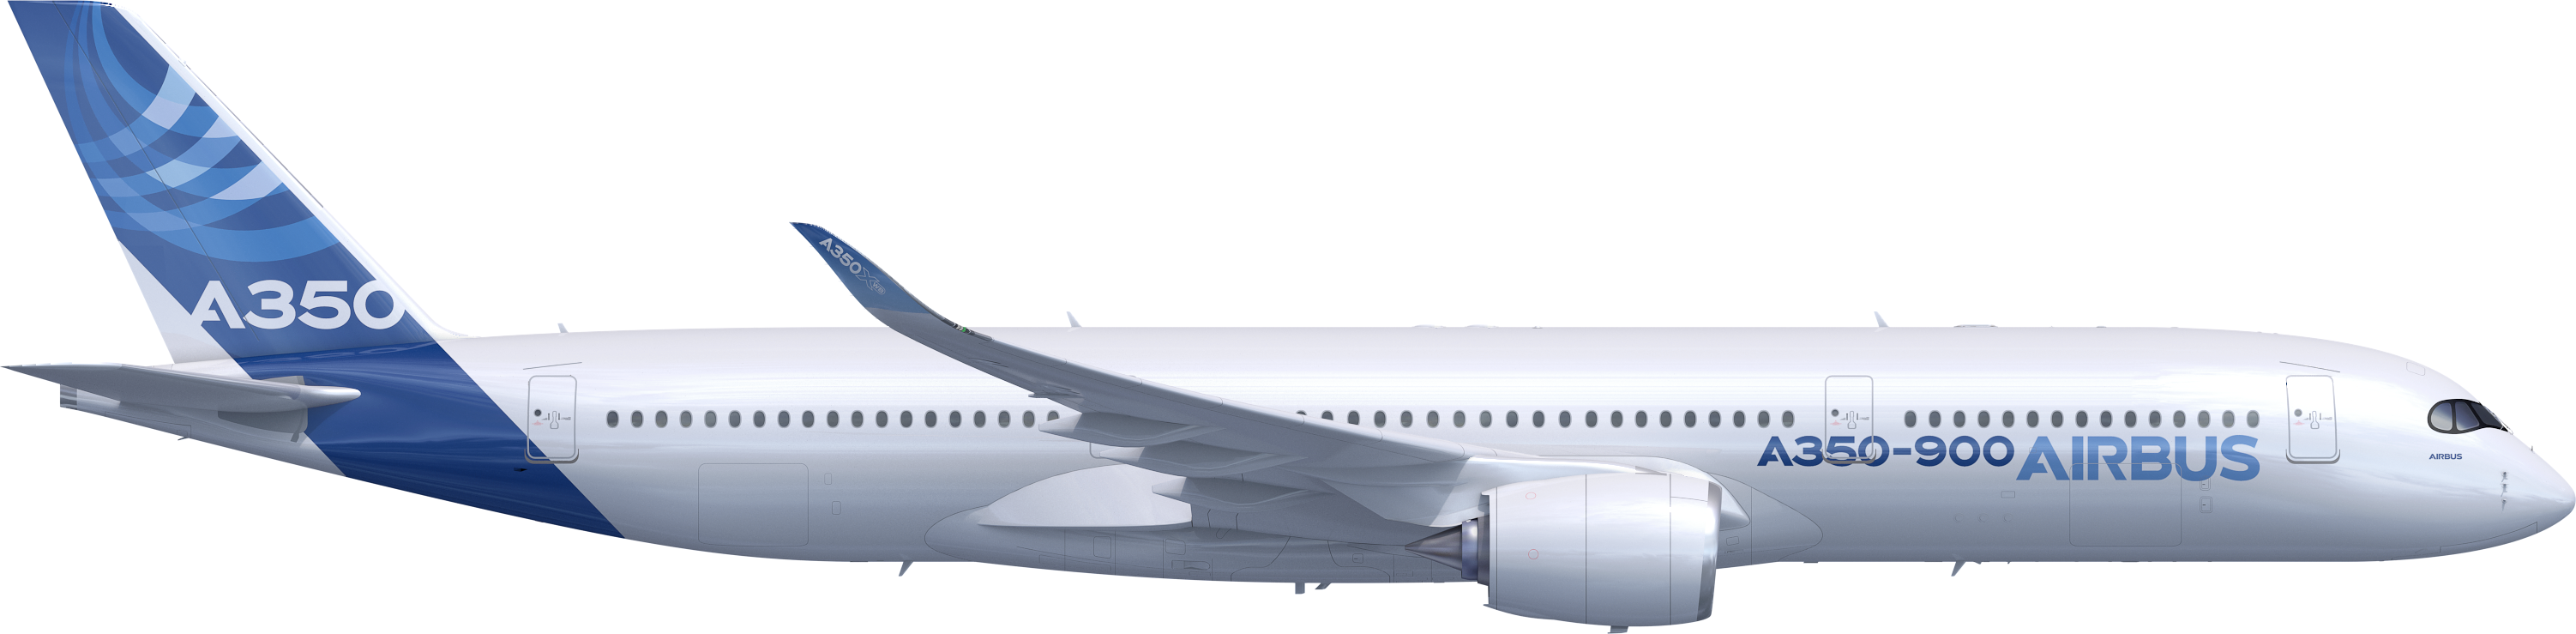 Download the A350-900 papercraft